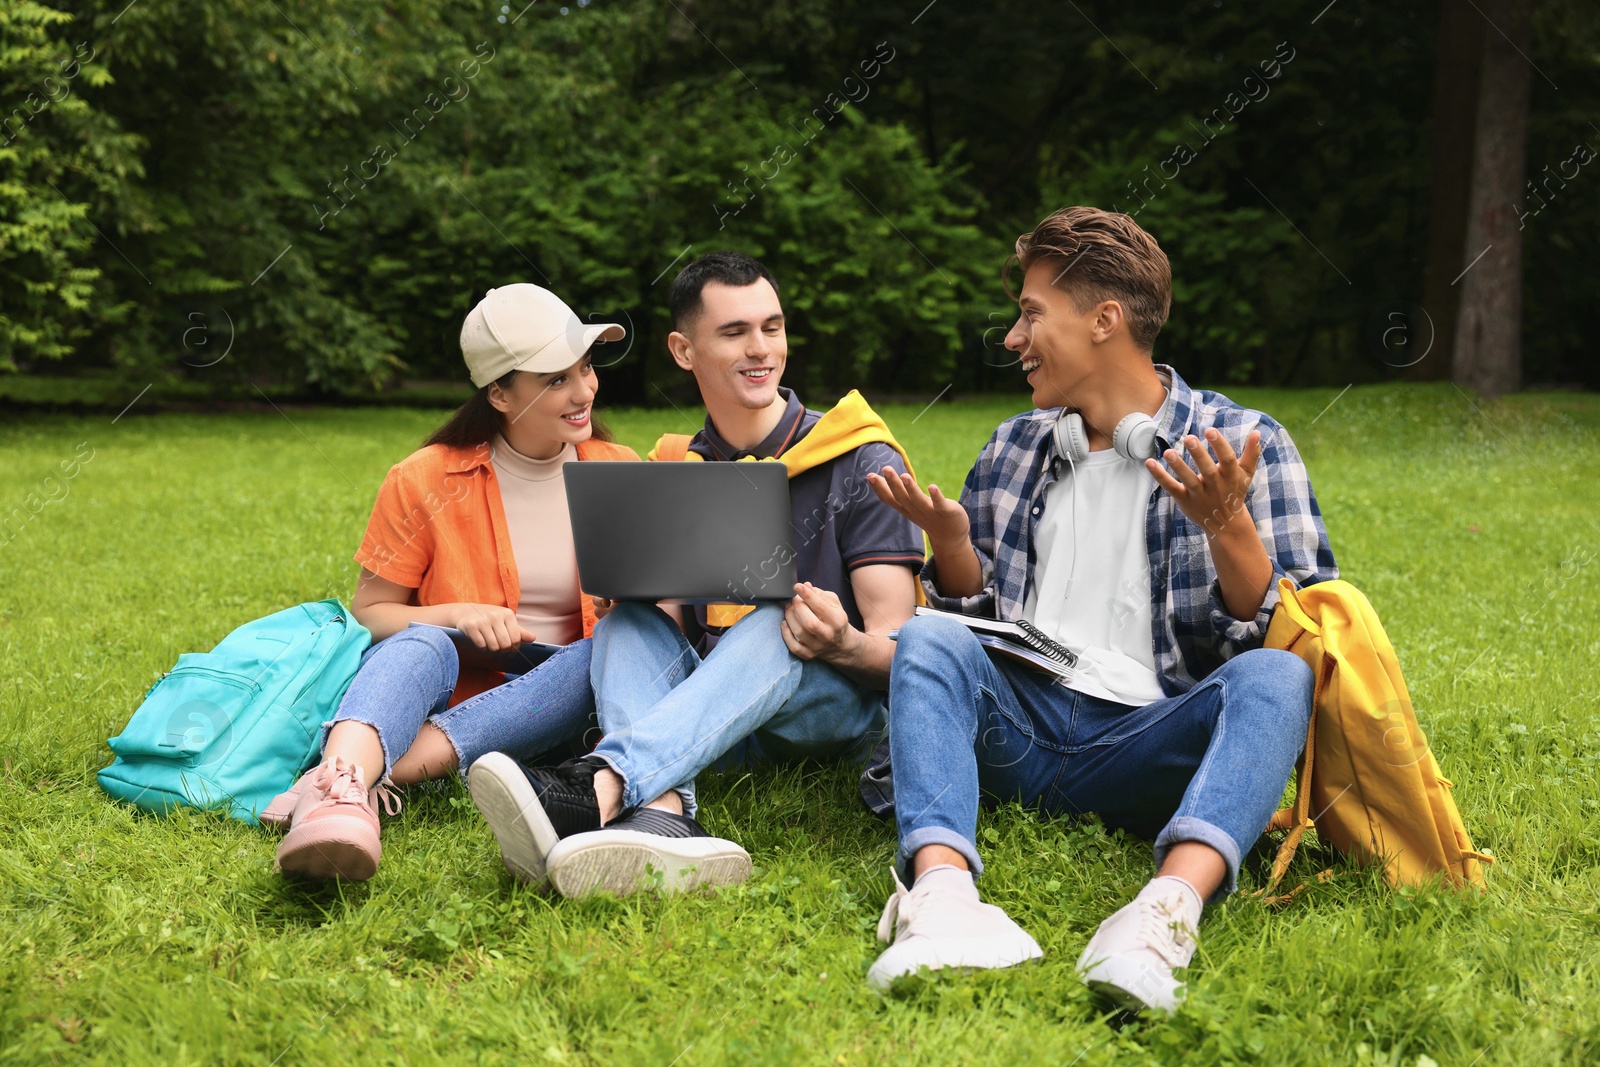 Photo of Happy young students learning together on green grass in park